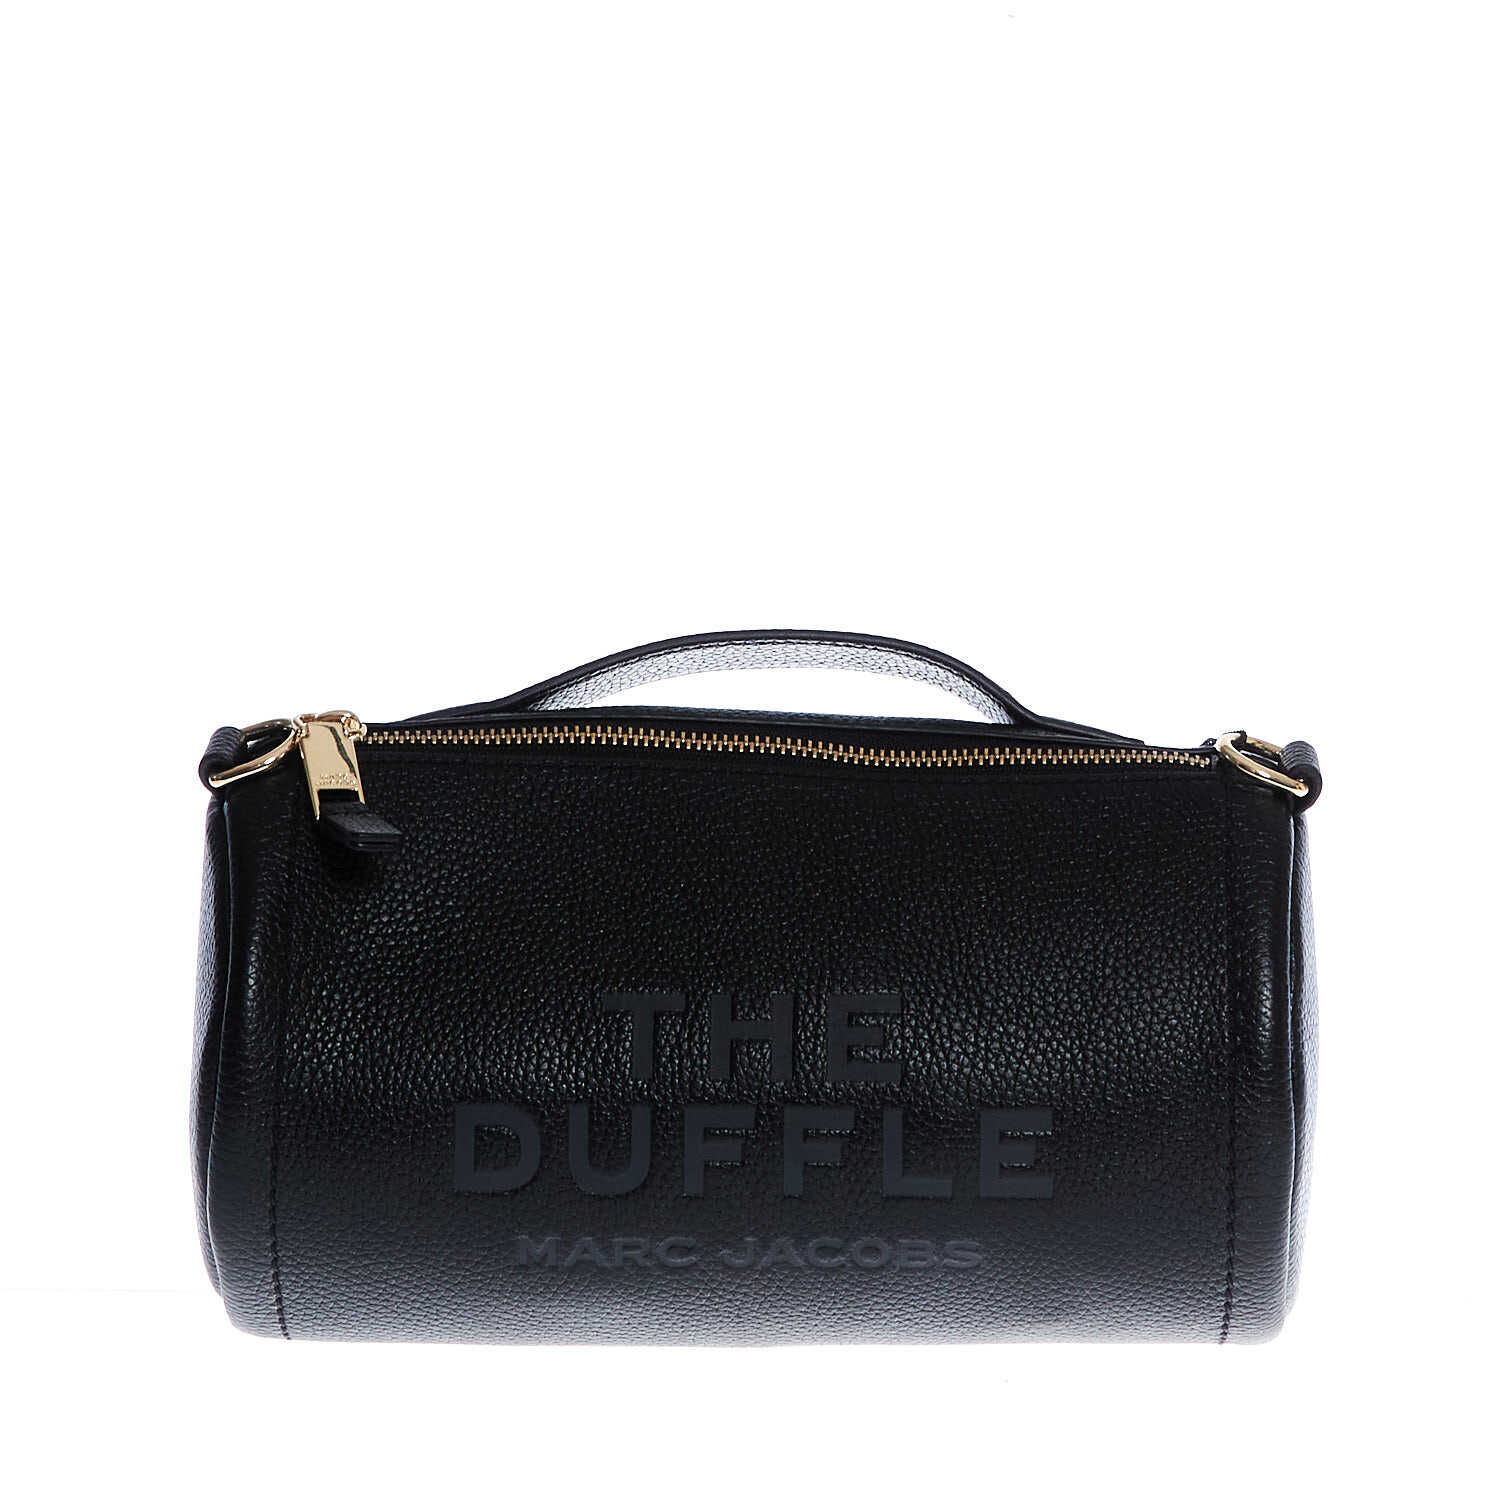 Marc Jacobs The Leather Duffle Bag Black